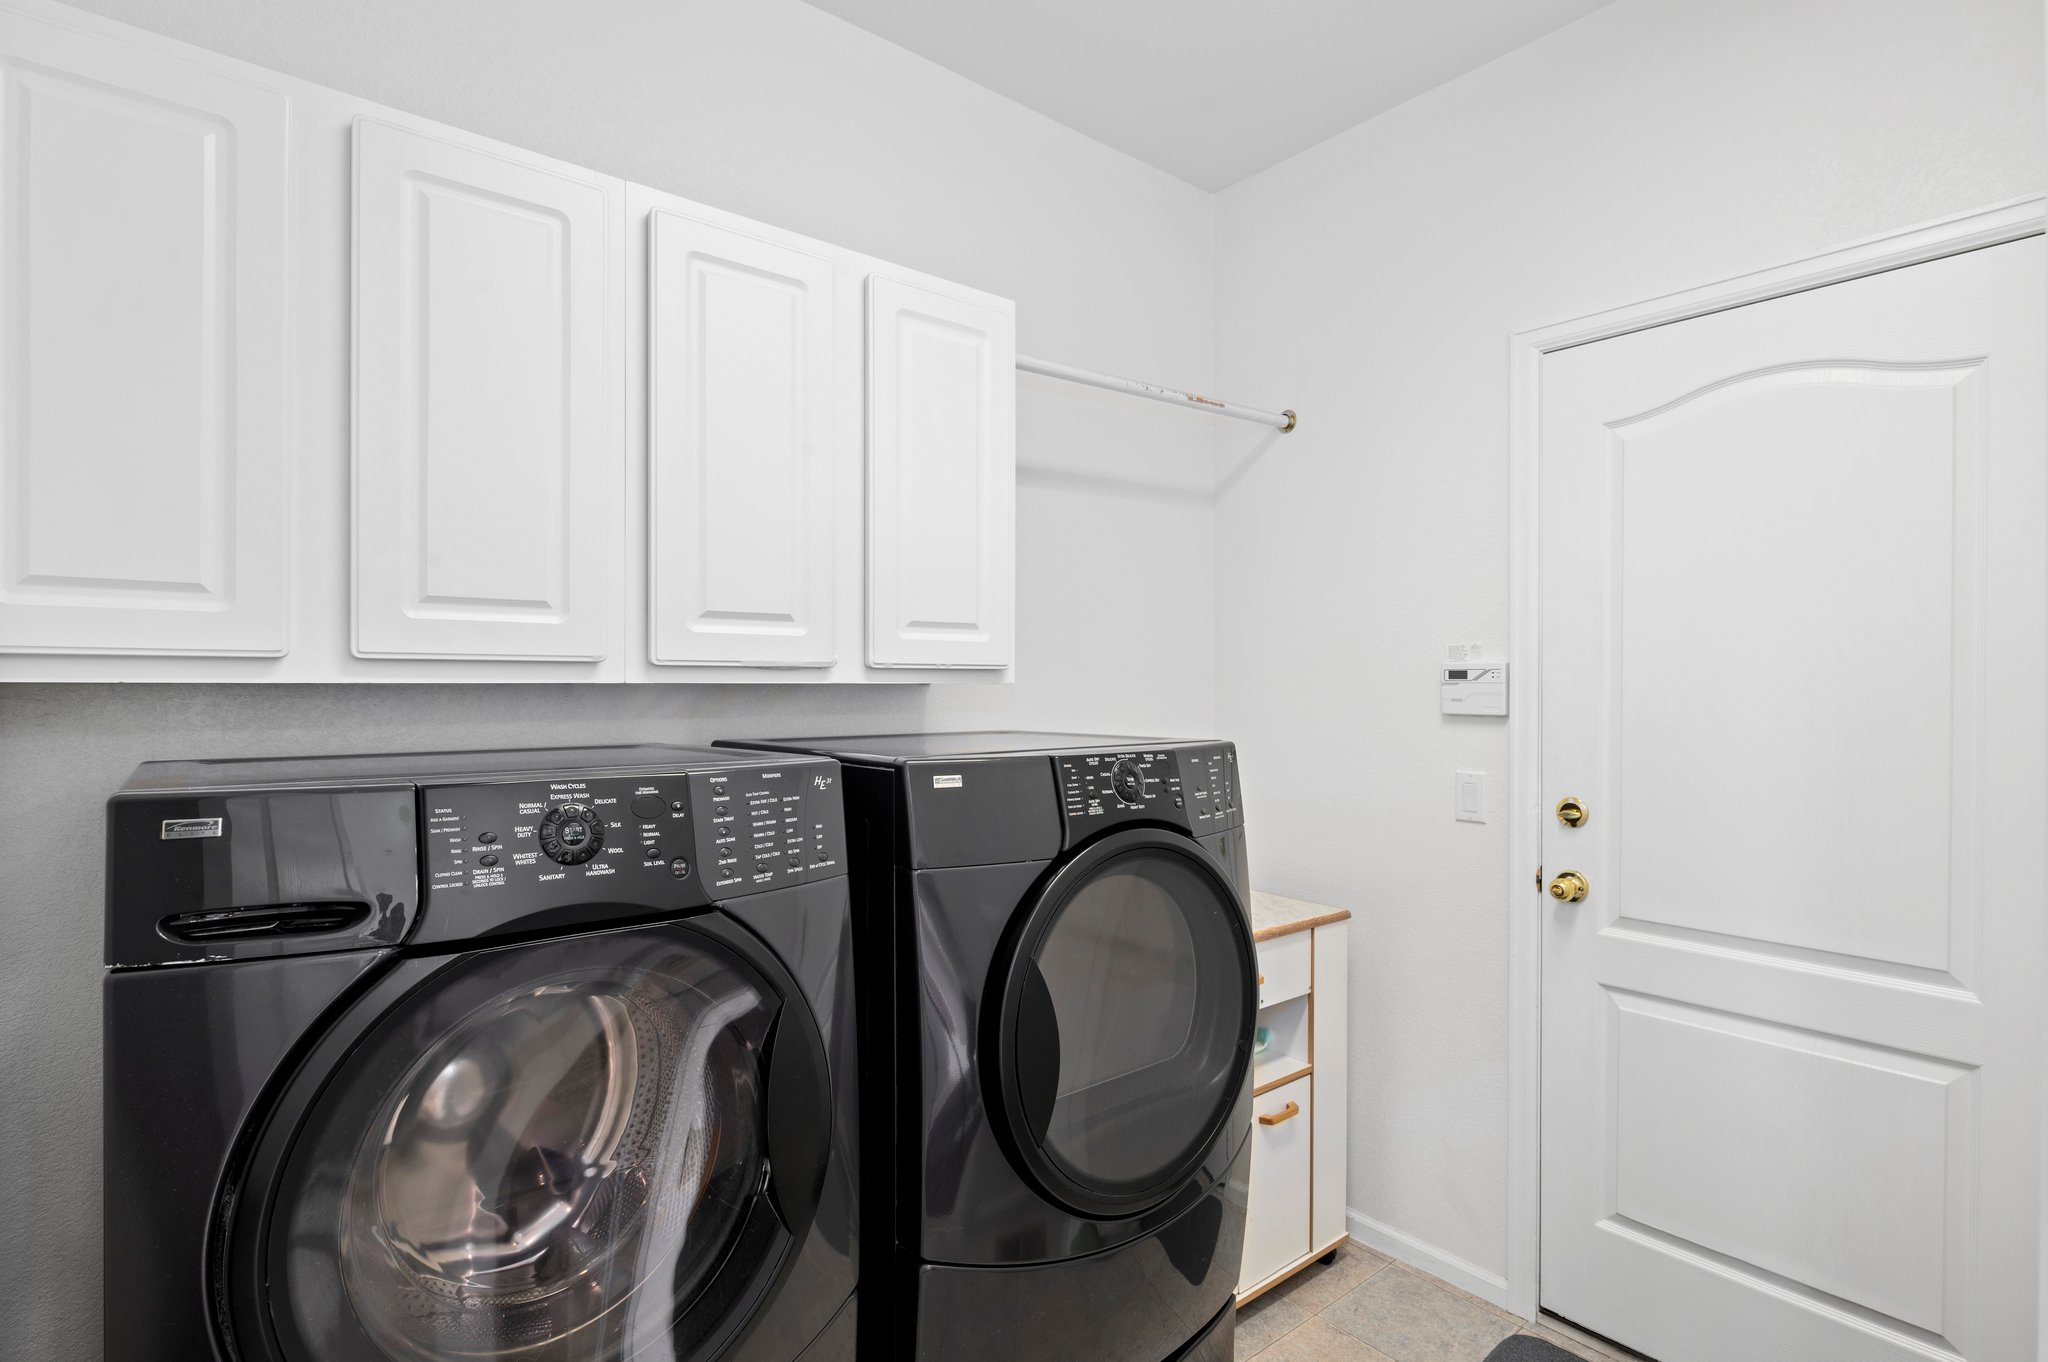 Mainfloor Laundry Room/Mudroom located off Garage~ Washer and Dryer Included